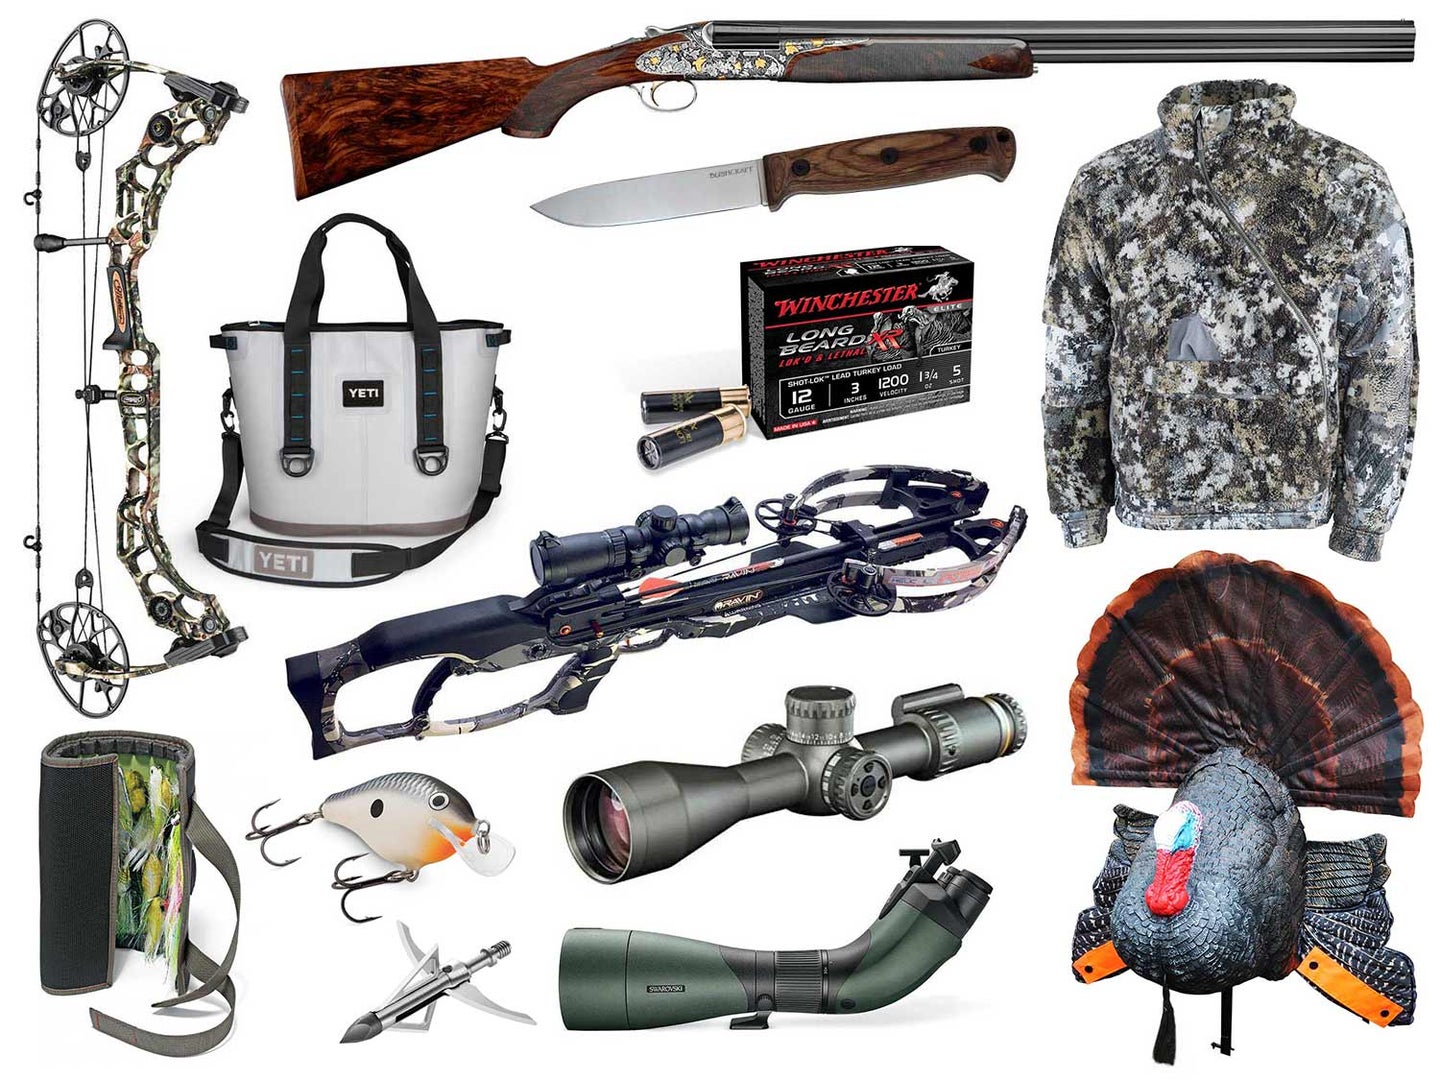  Today's Deals - Fishing Equipment / Hunting & Fishing: Sports &  Outdoors